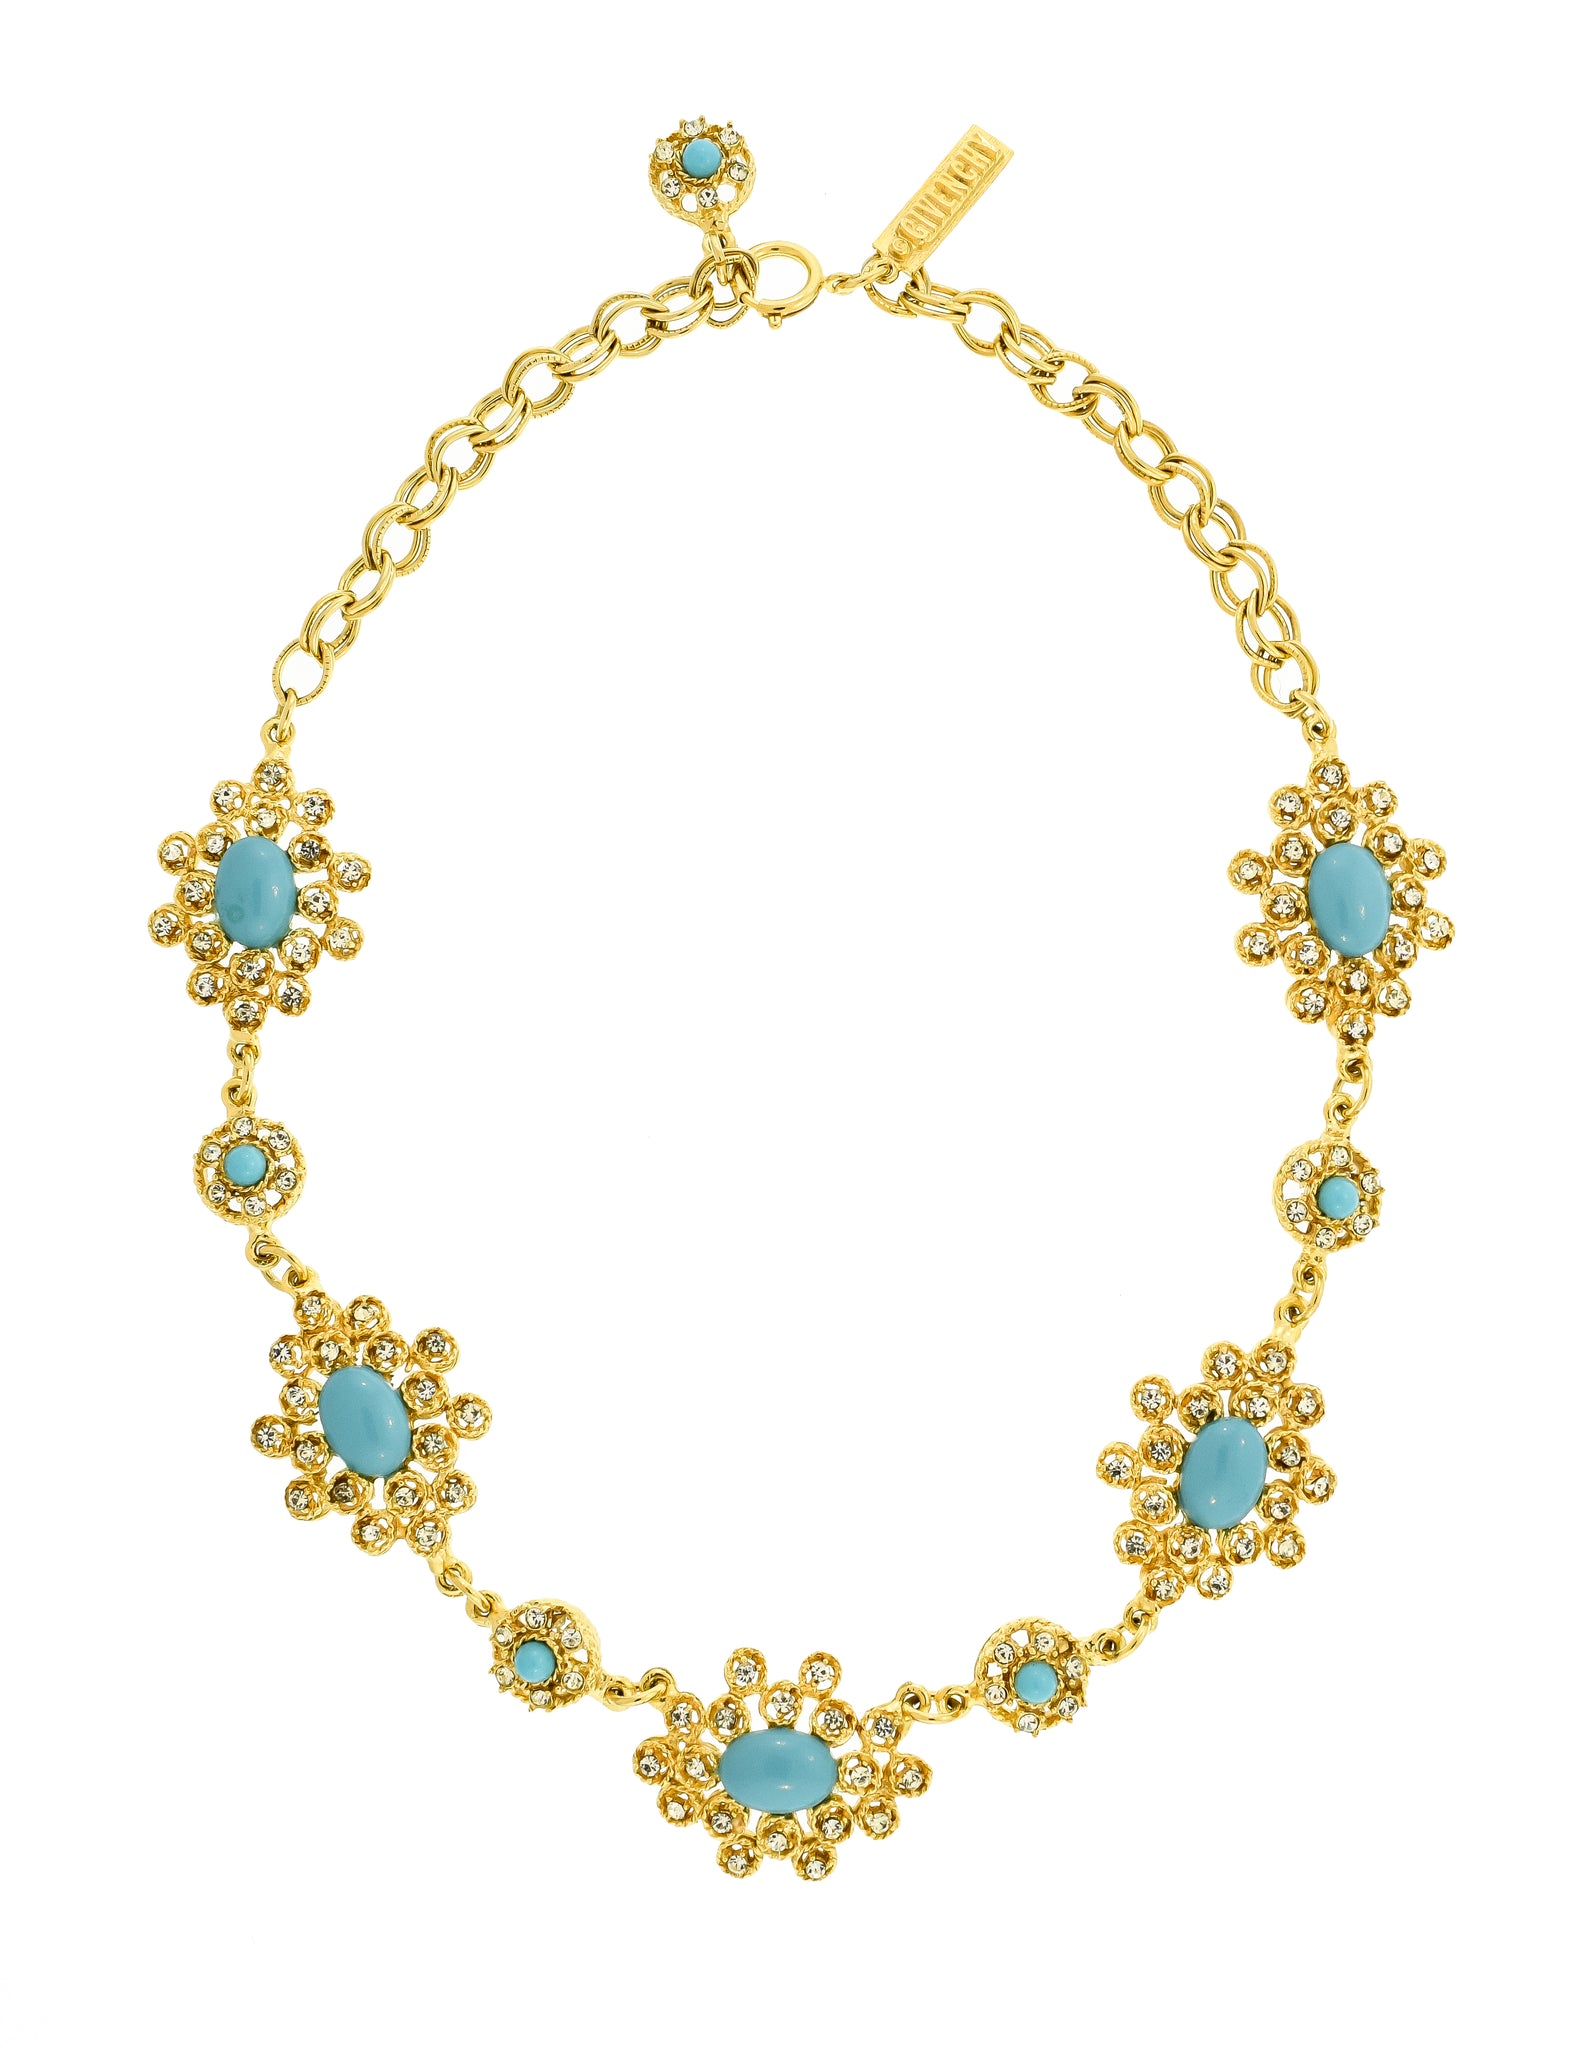 Givenchy Vintage 1960s Gold Rhinestone and Turquoise Cabochon Necklace